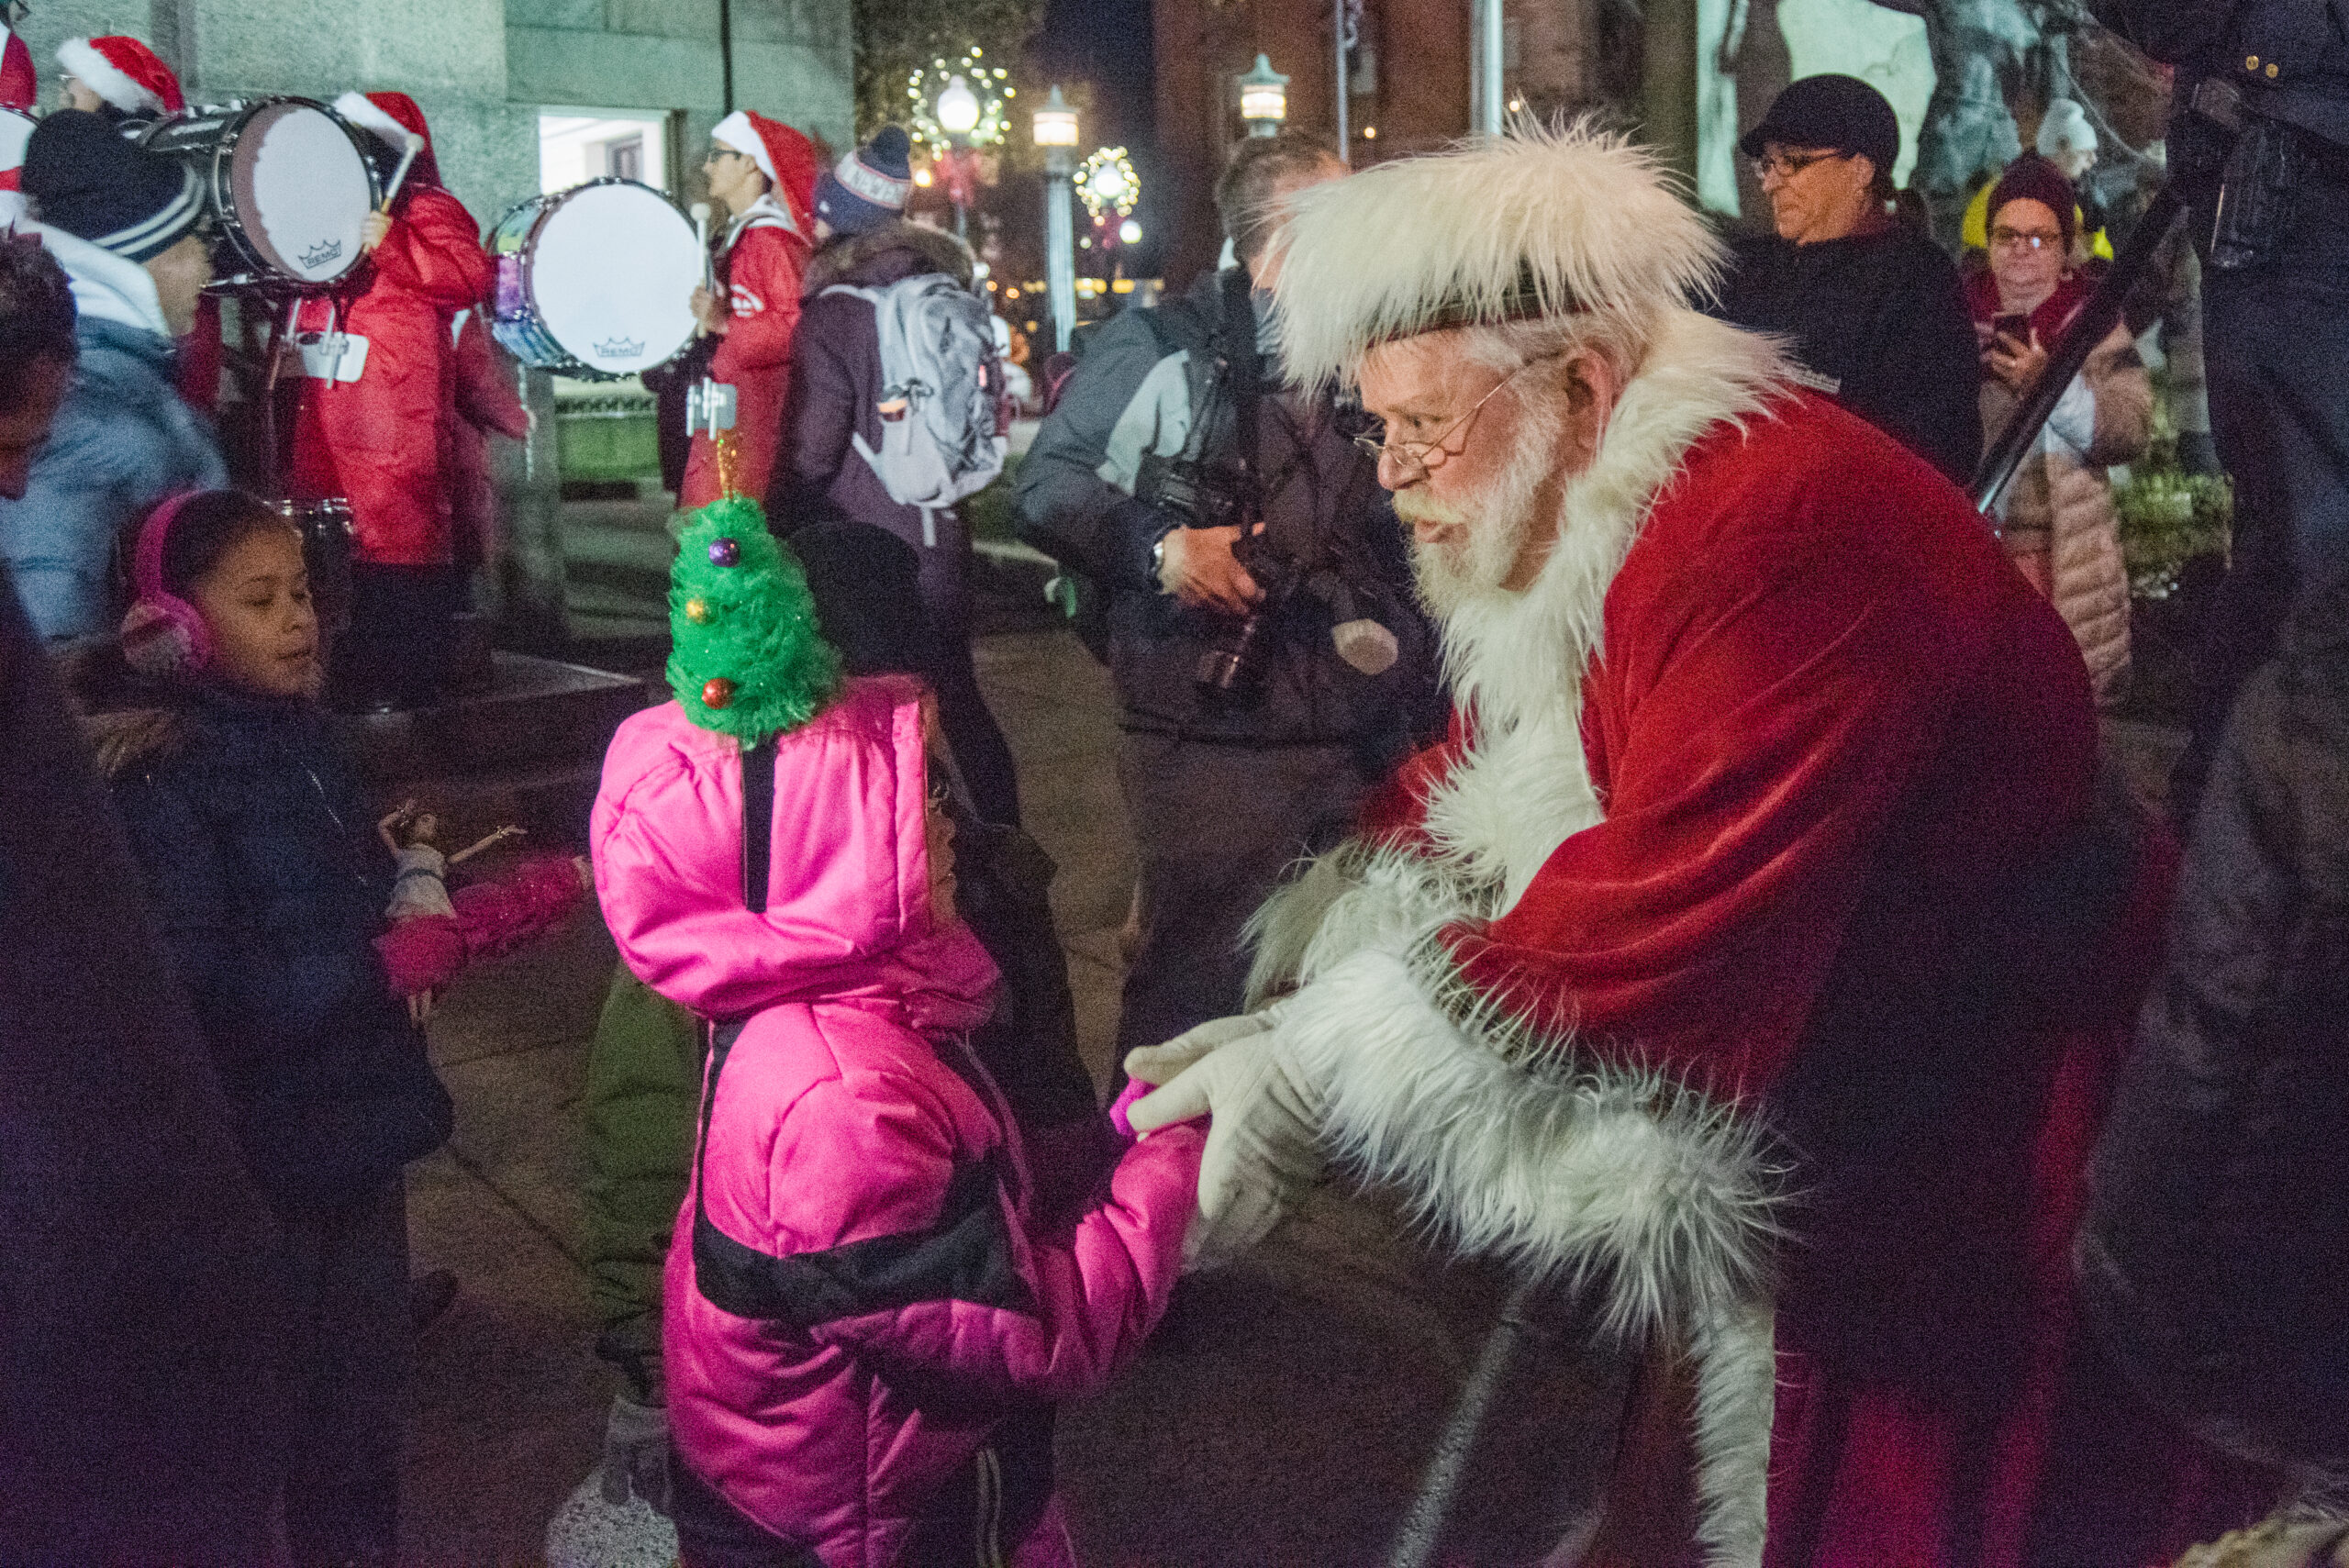 Santa Claus greets children at downtown New Bedford's Holiday Stroll